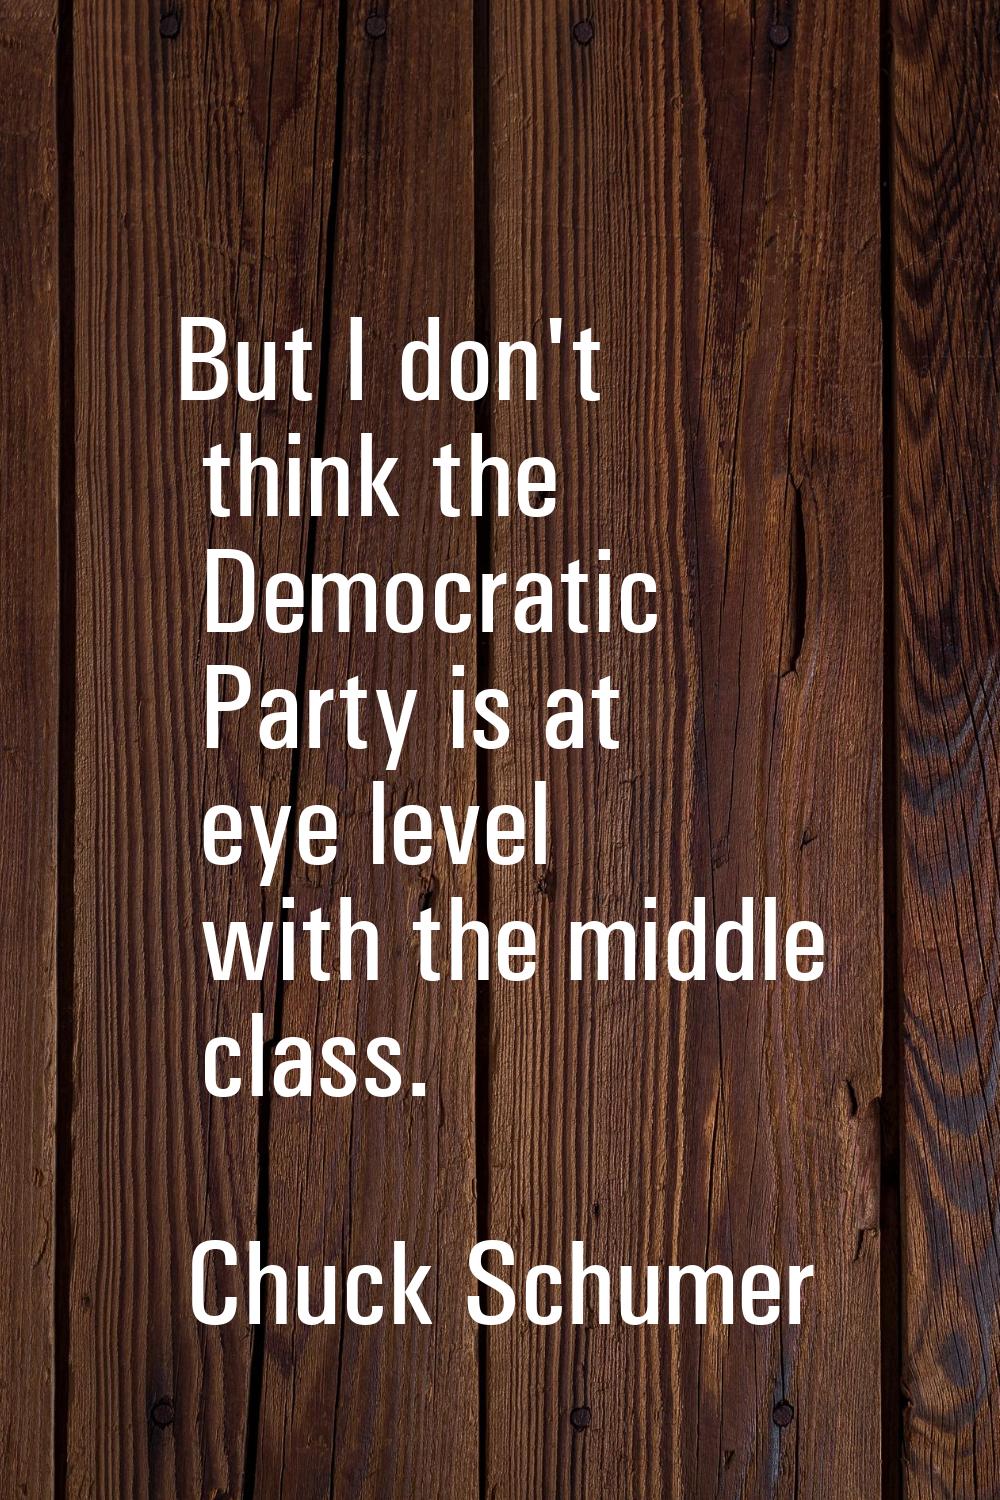 But I don't think the Democratic Party is at eye level with the middle class.